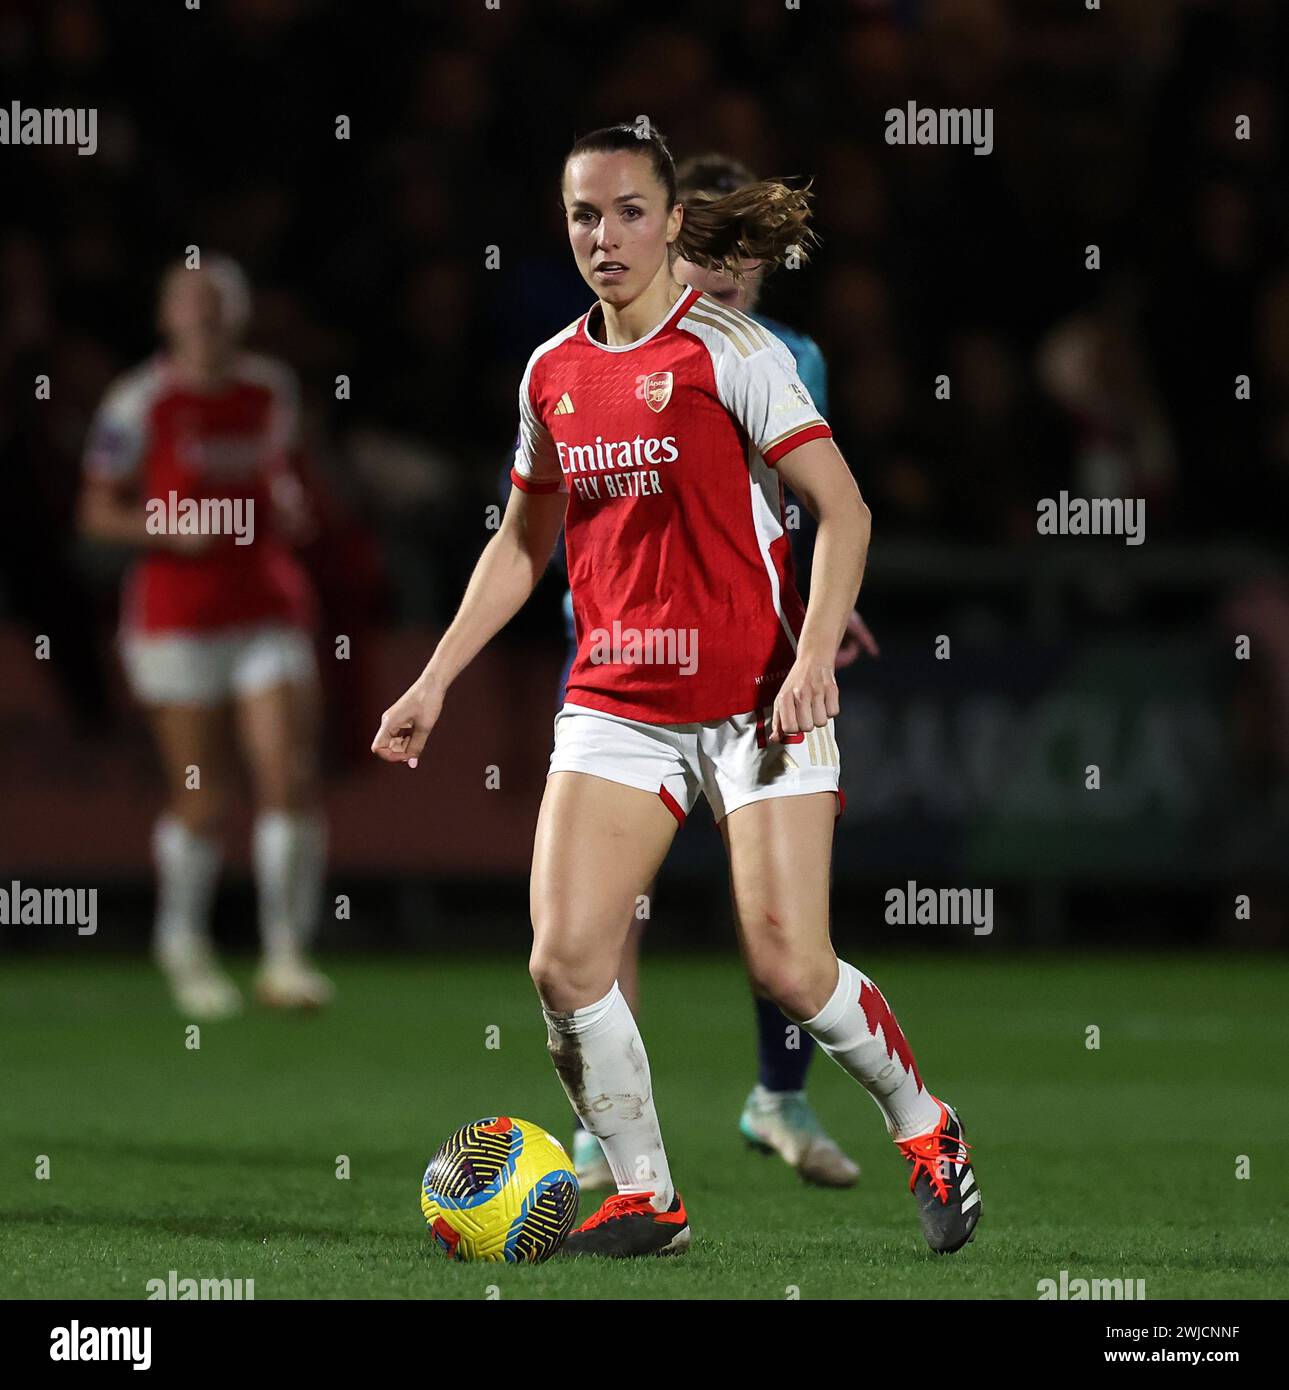 Dartford, UK. 14th Feb, 2024. Dartford, Kent, 14 February 2024: Lia Walti (13 Arsenal) during the Continental Tyres League Cup football match between London City Lionesses and Arsenal at Princes Park in Dartford, England. (James Whitehead/SPP) Credit: SPP Sport Press Photo. /Alamy Live News Stock Photo